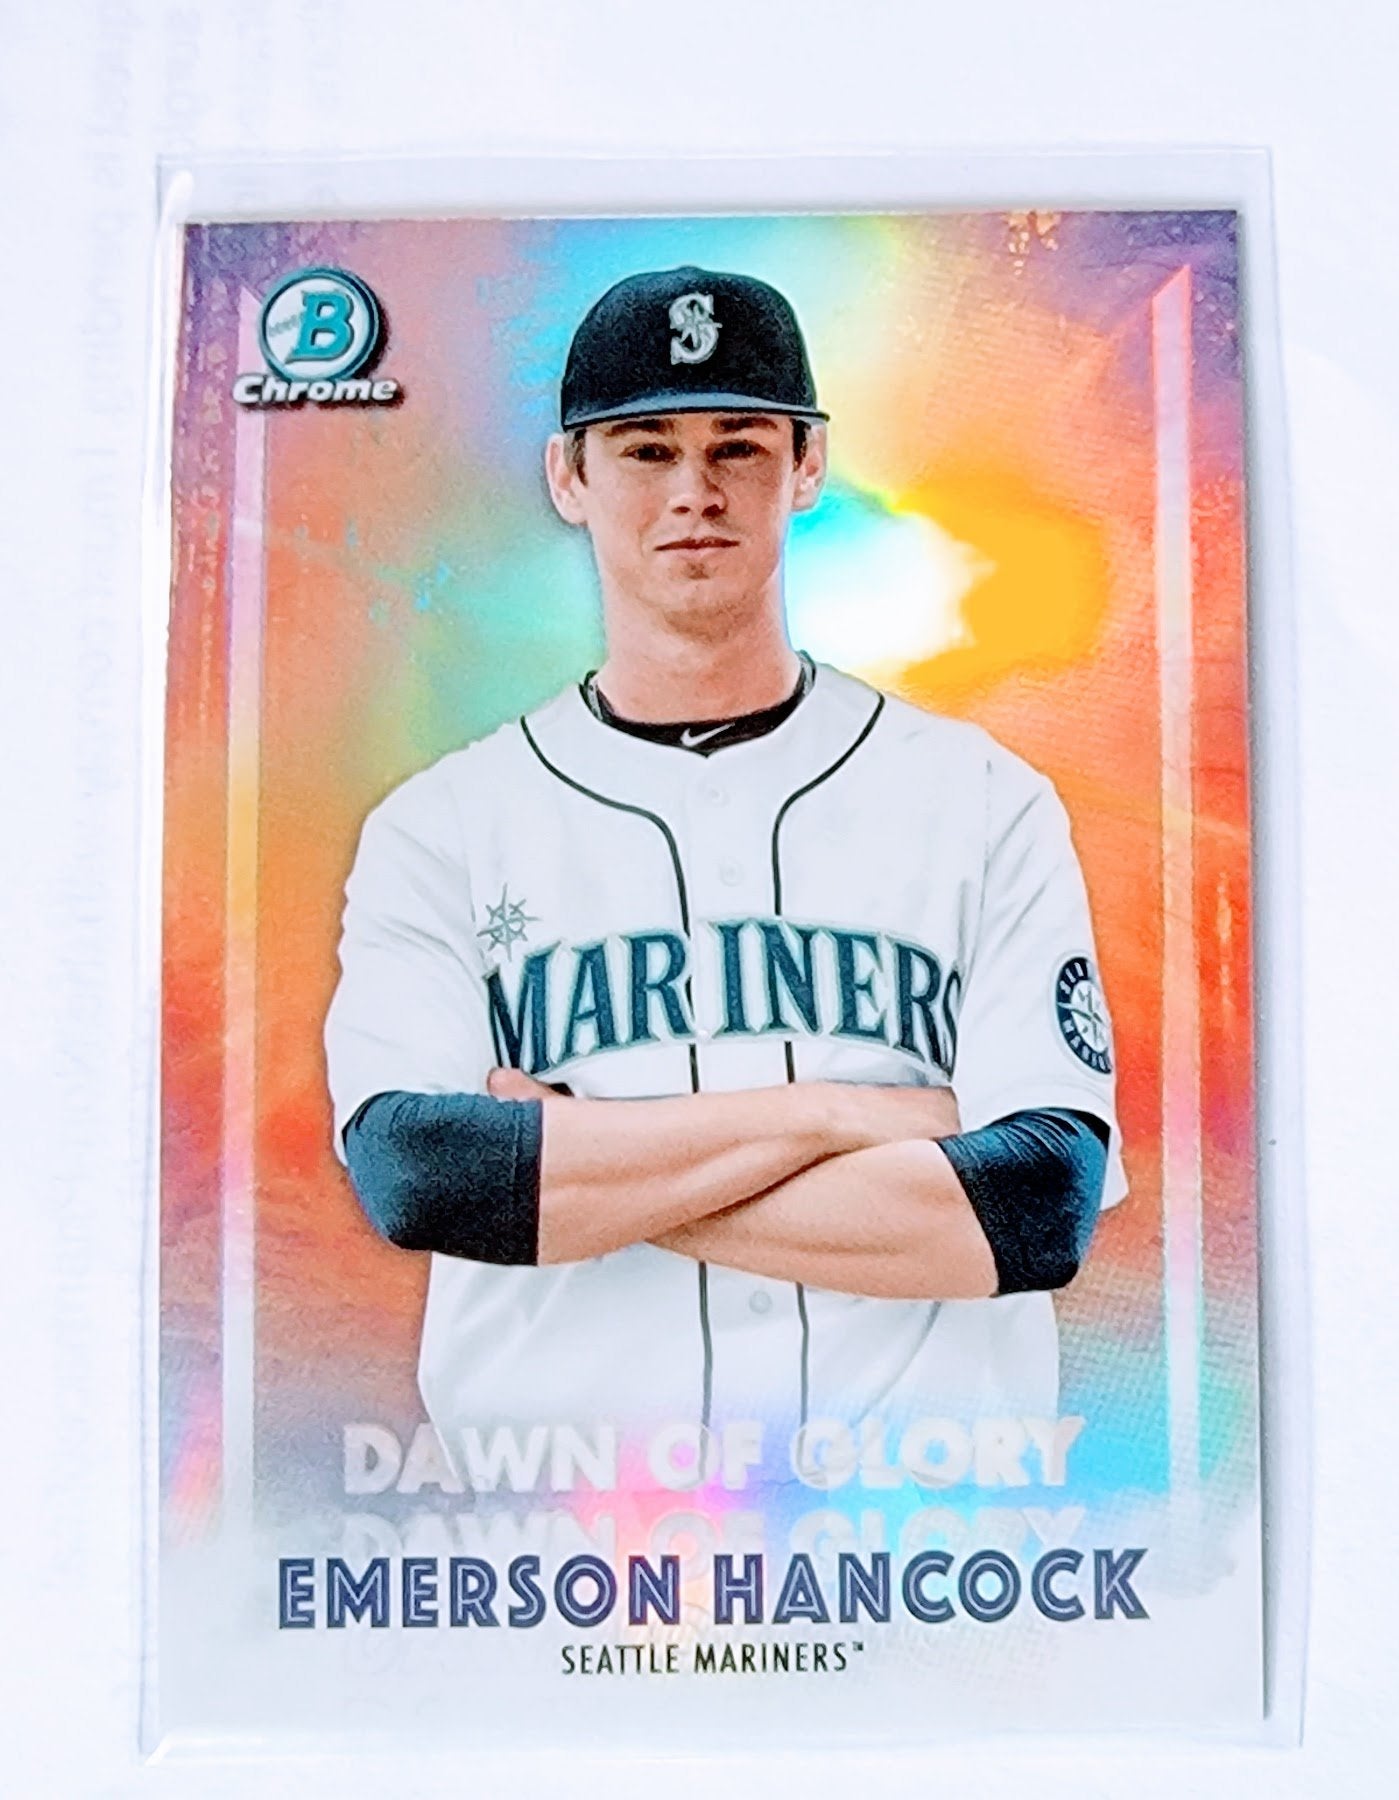 2021 Bowman Chrome Emerson Hancock Dawn of Glory Refractor Baseball Trading Card SMCB1 simple Xclusive Collectibles   